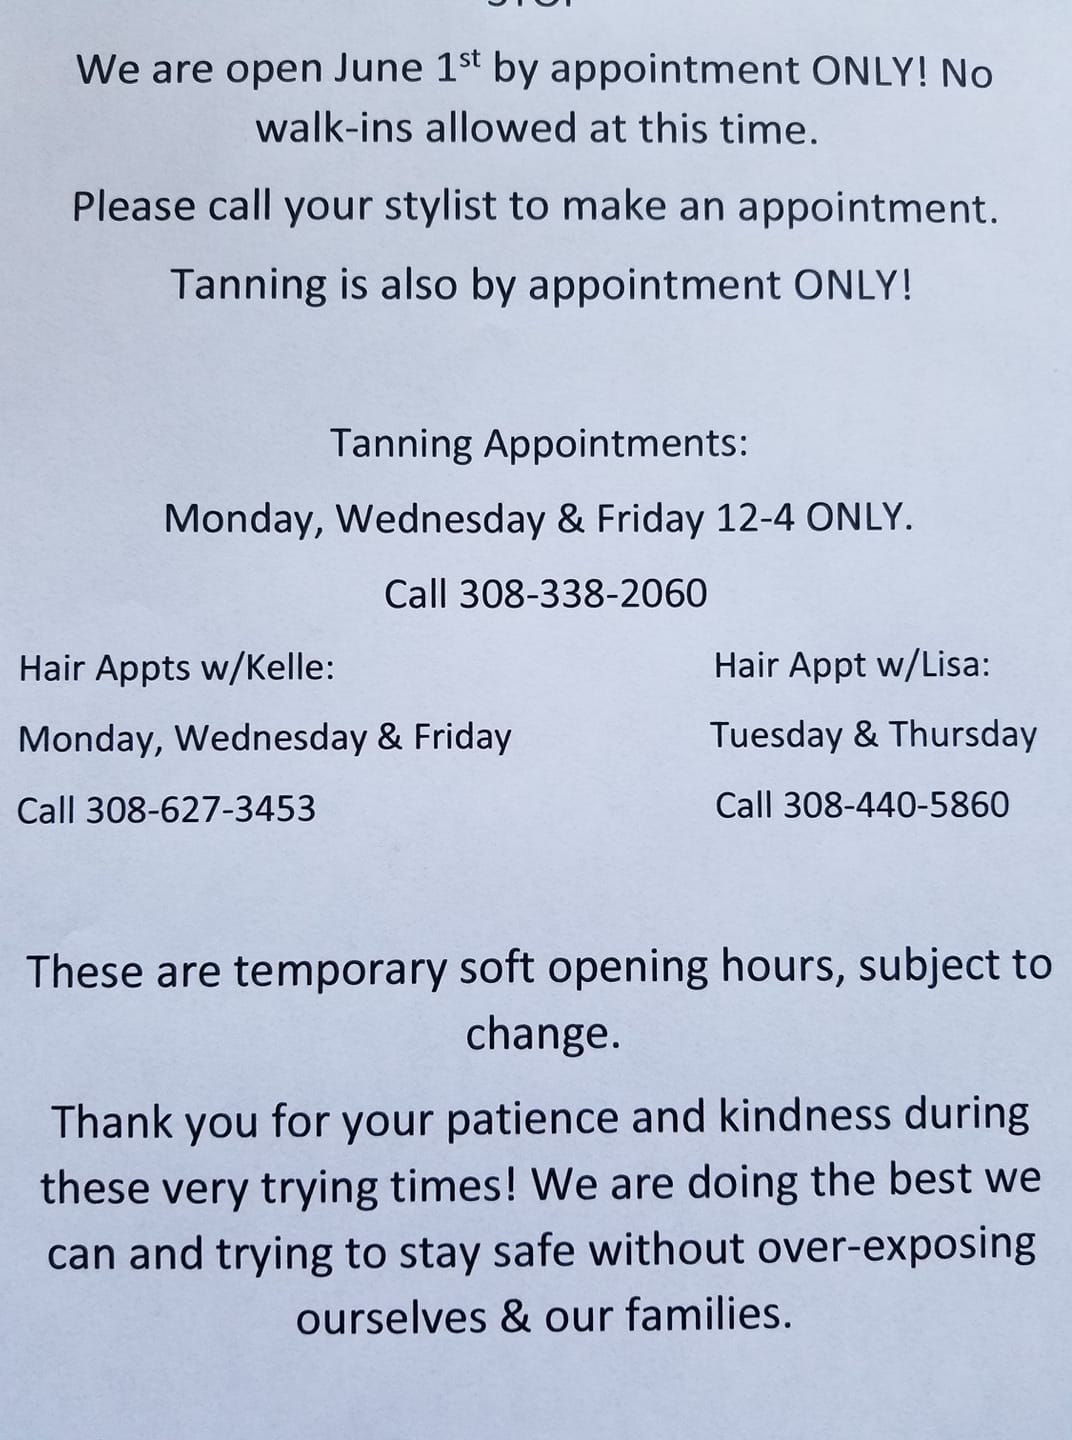 The Look Salon Tanning & Boutique